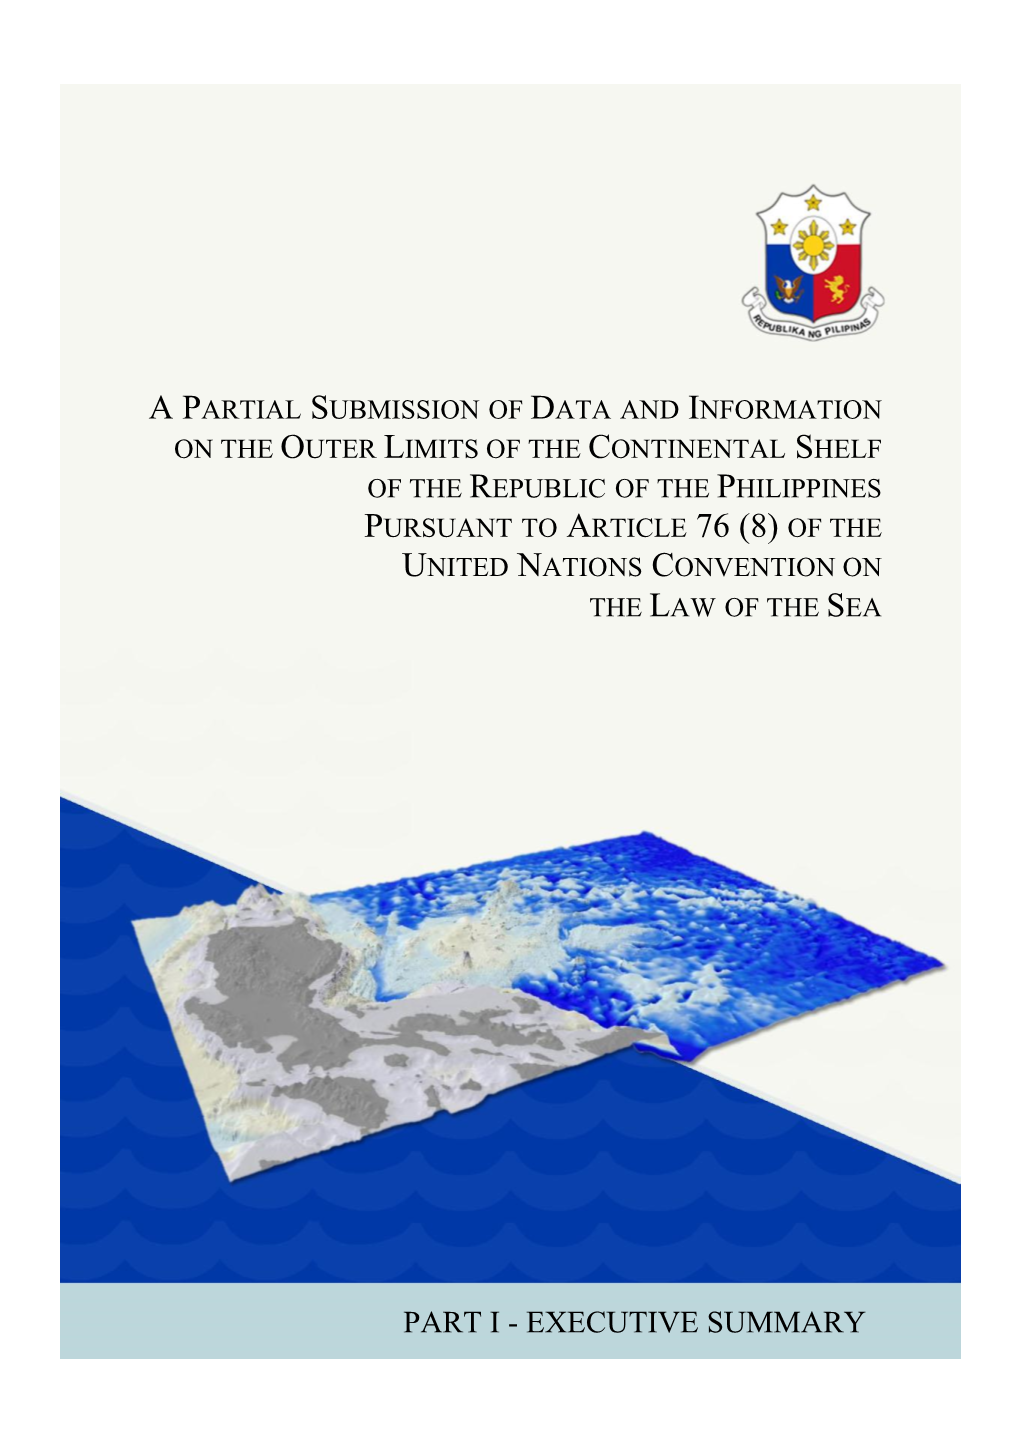 EXECUTIVE SUMMARY ECS Submission of the Republic of the Philippines